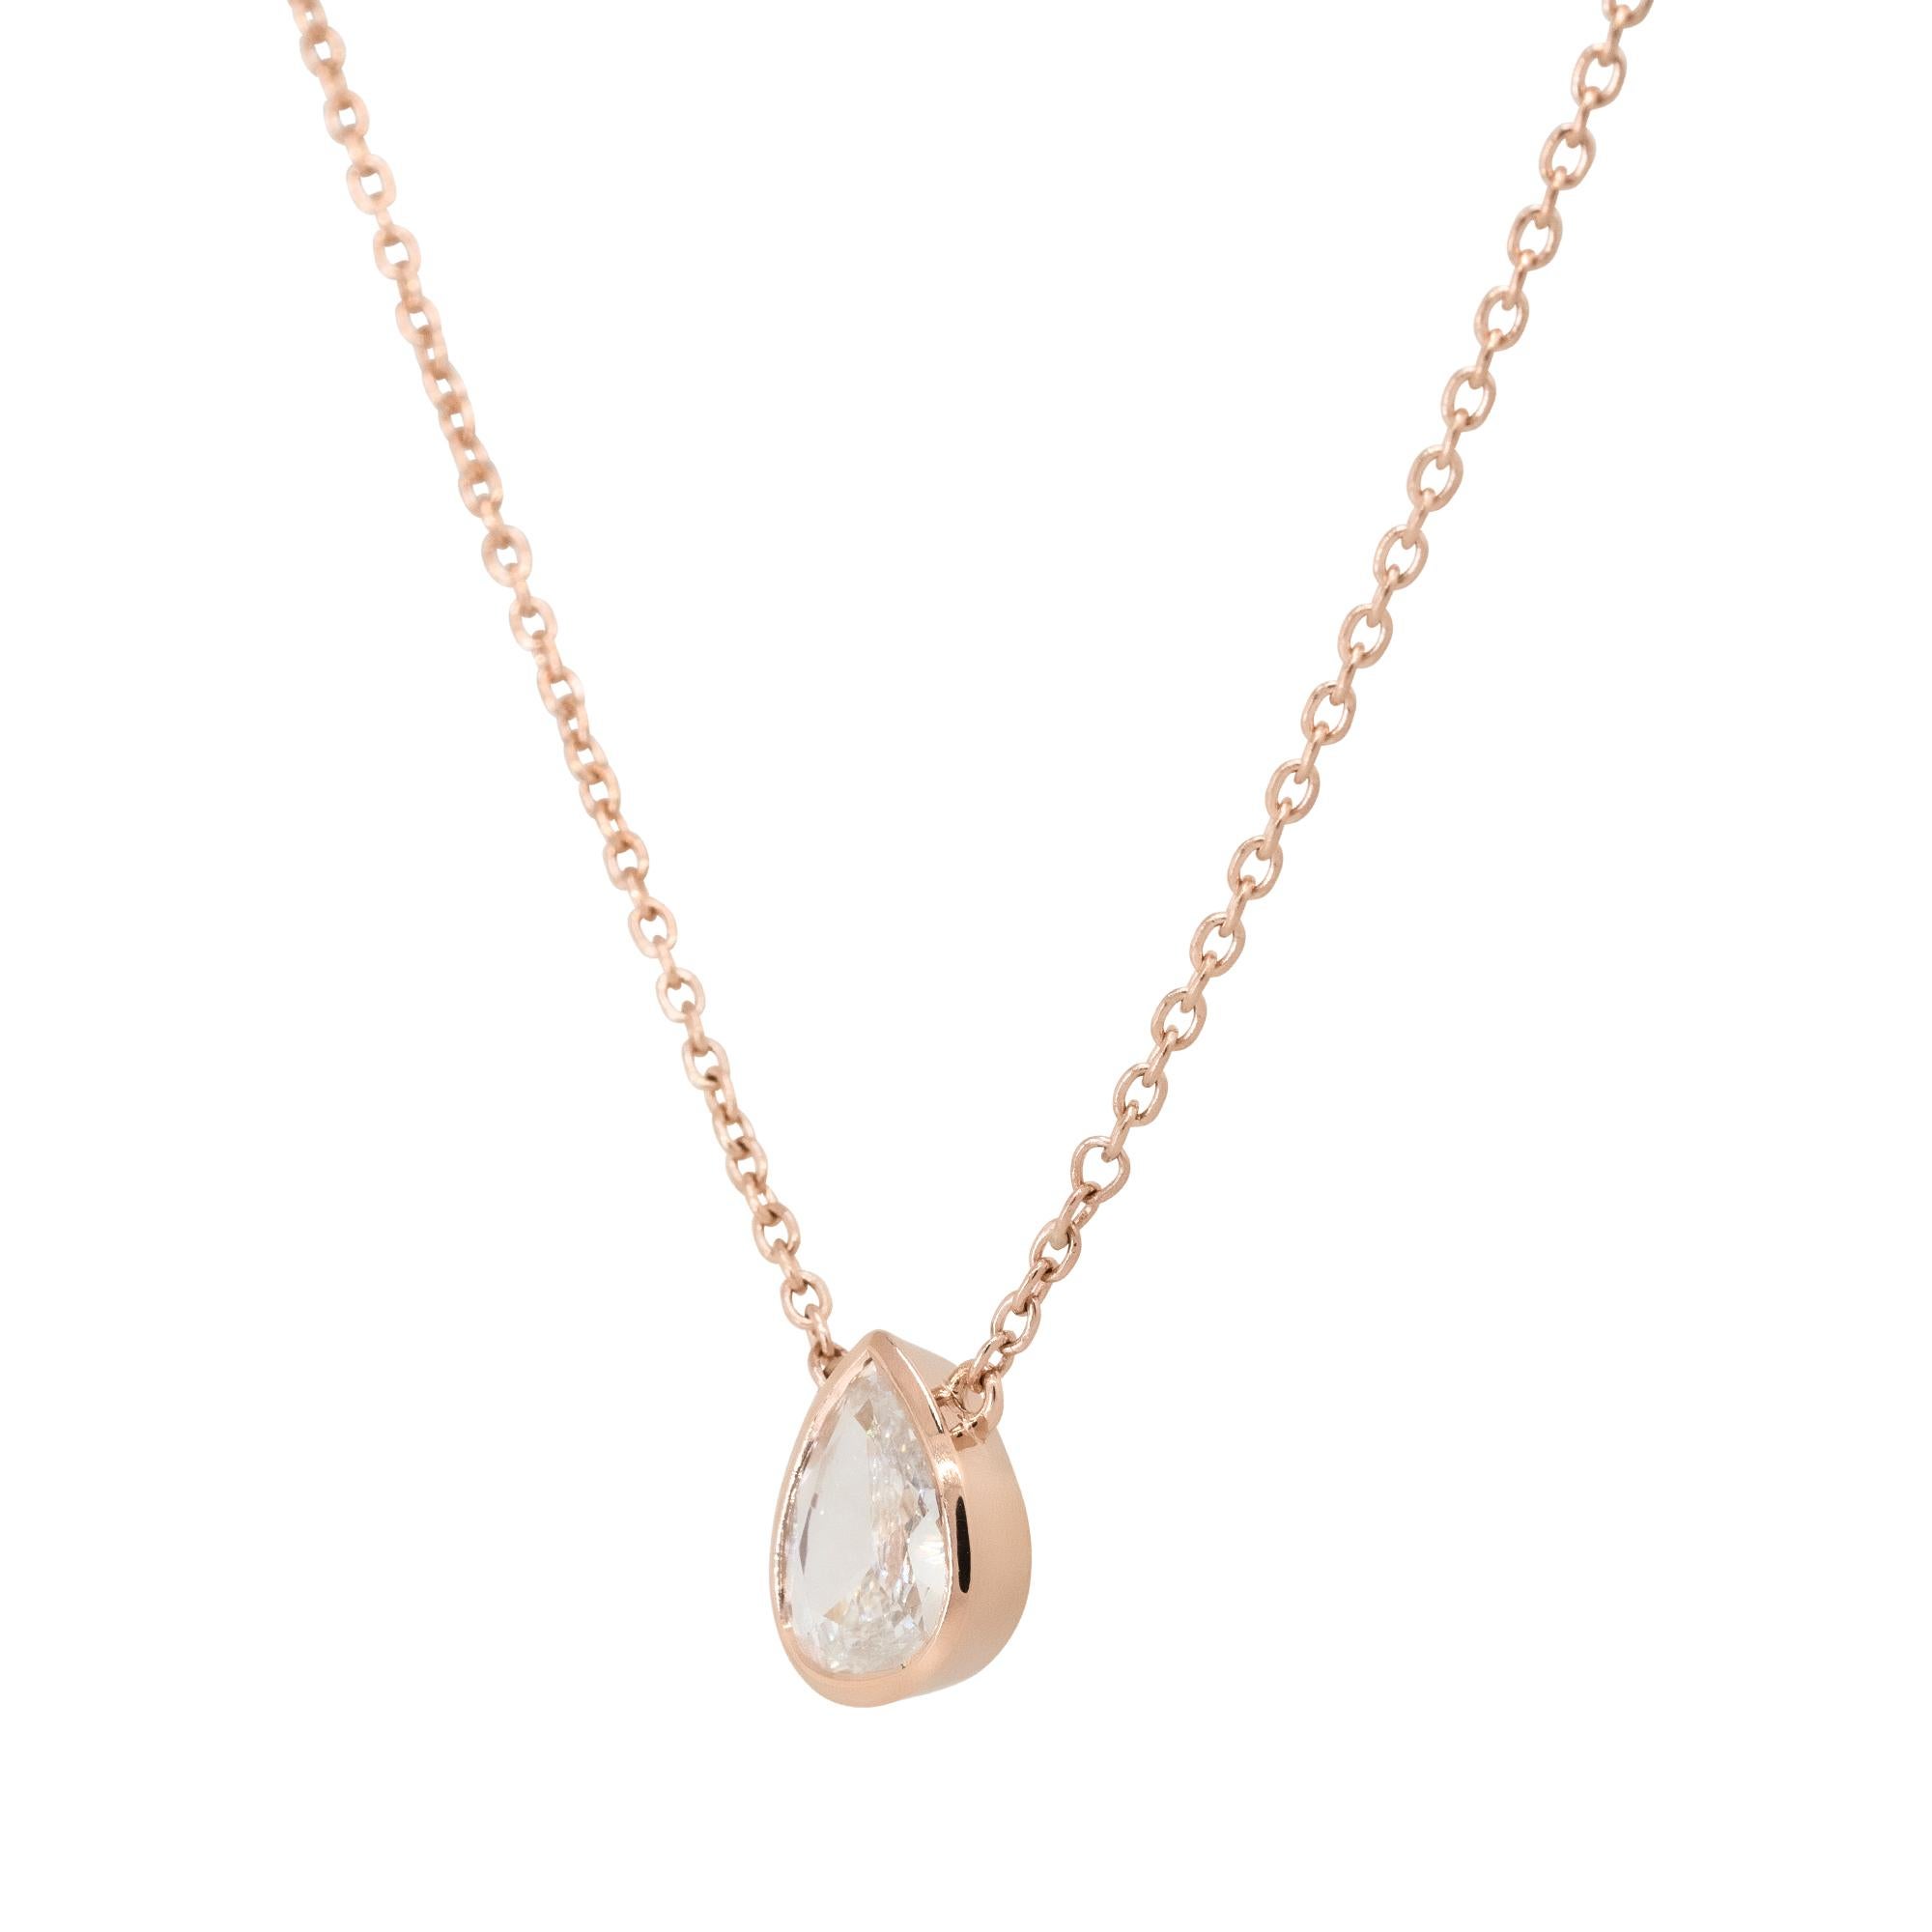 Material: 14k Rose Gold
Diamond Details: Approx. 0.95ctw pear shaped Diamond. Diamond is G in color and VS2 in clarity
Clasps: Lobster Clasp
Total Weight: 4.3g (2.8dwt) 
Pendant Measurements: 8.40mm x 10.90mm
Length: 18